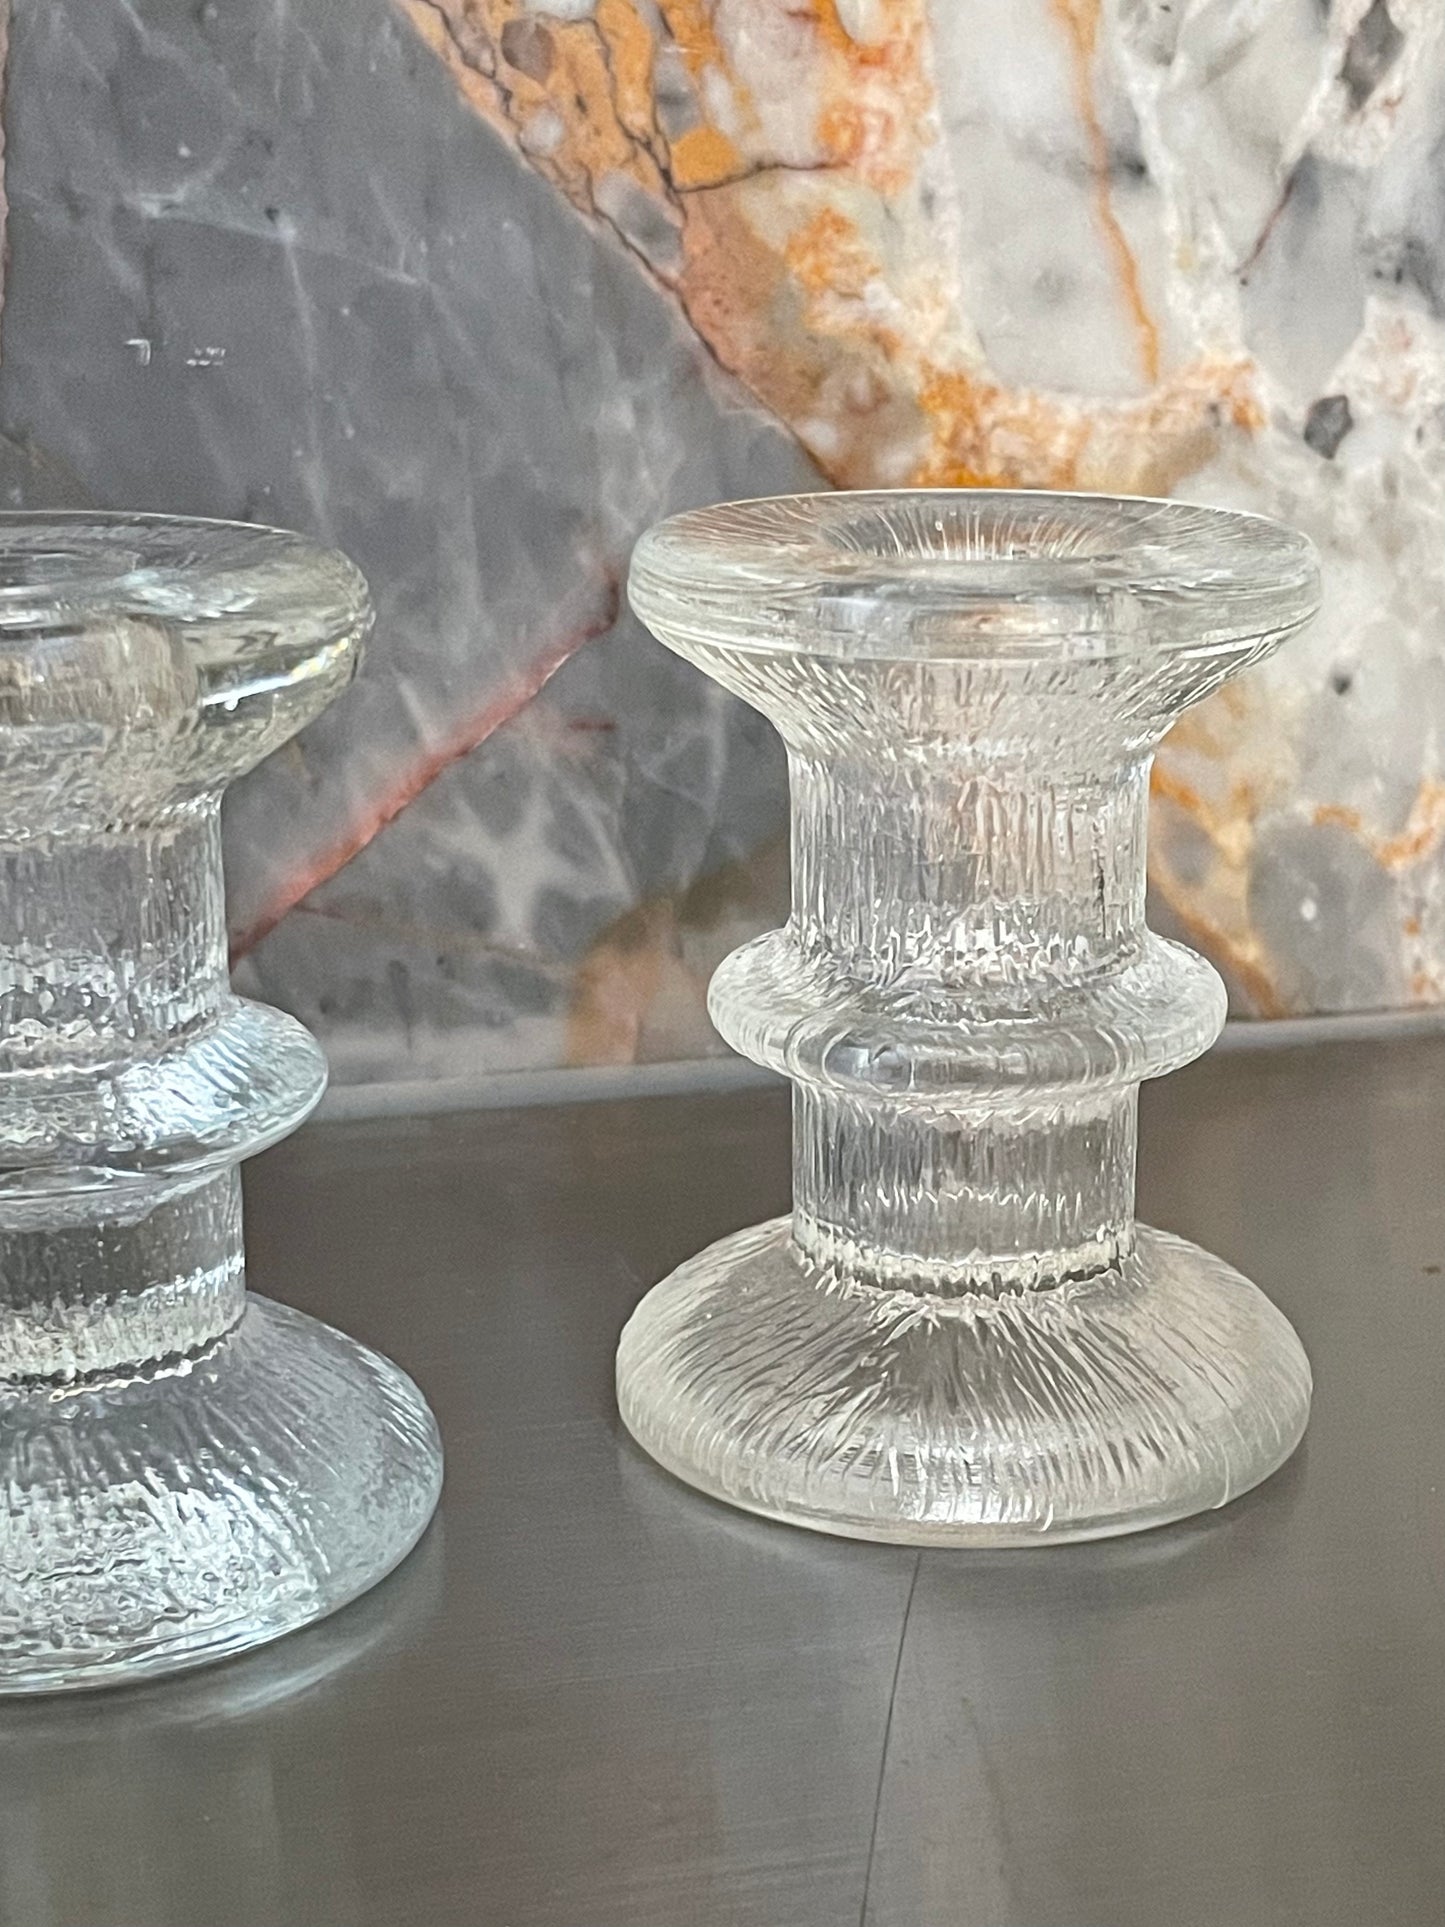 A pair of candlesticks in the style of Iittala